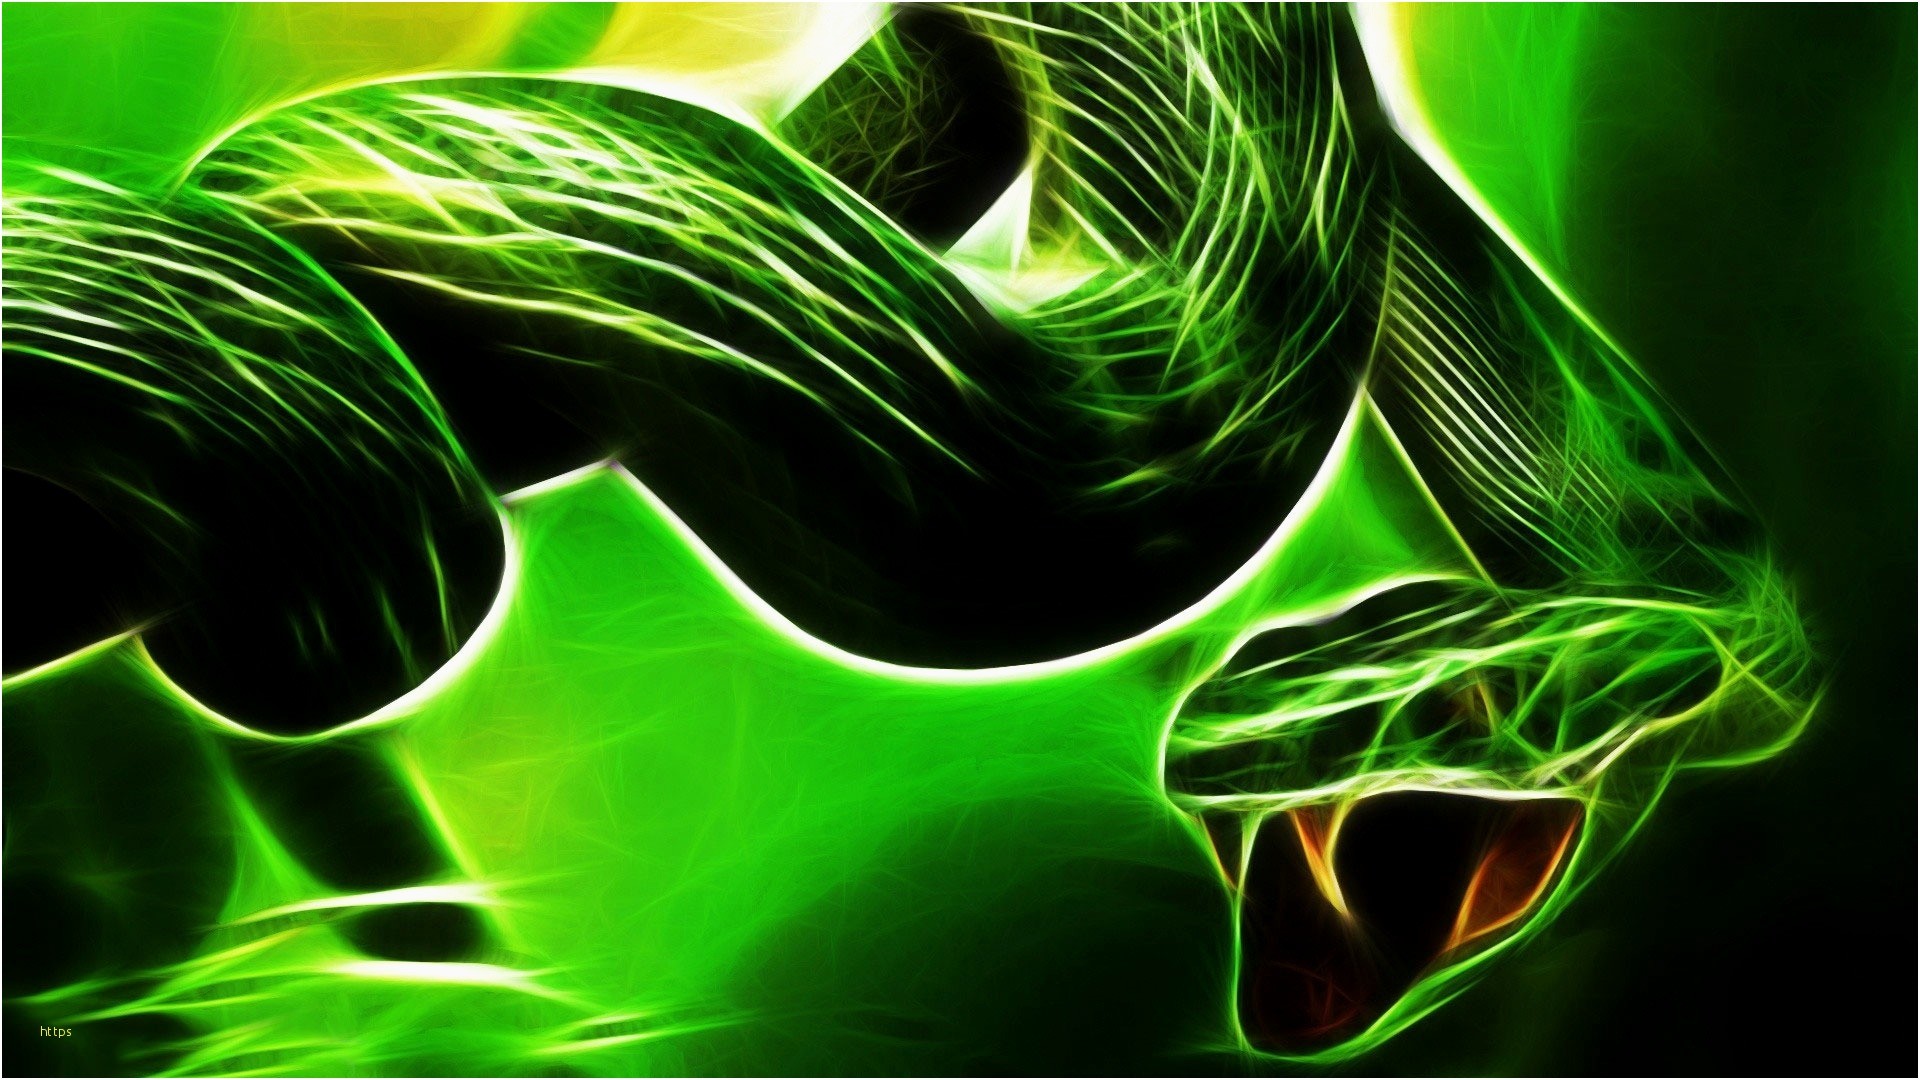 1920x1080 ... Neon Green Wallpaper Unique Green Neon Backgrounds Hd Page 3 Of 3 ...